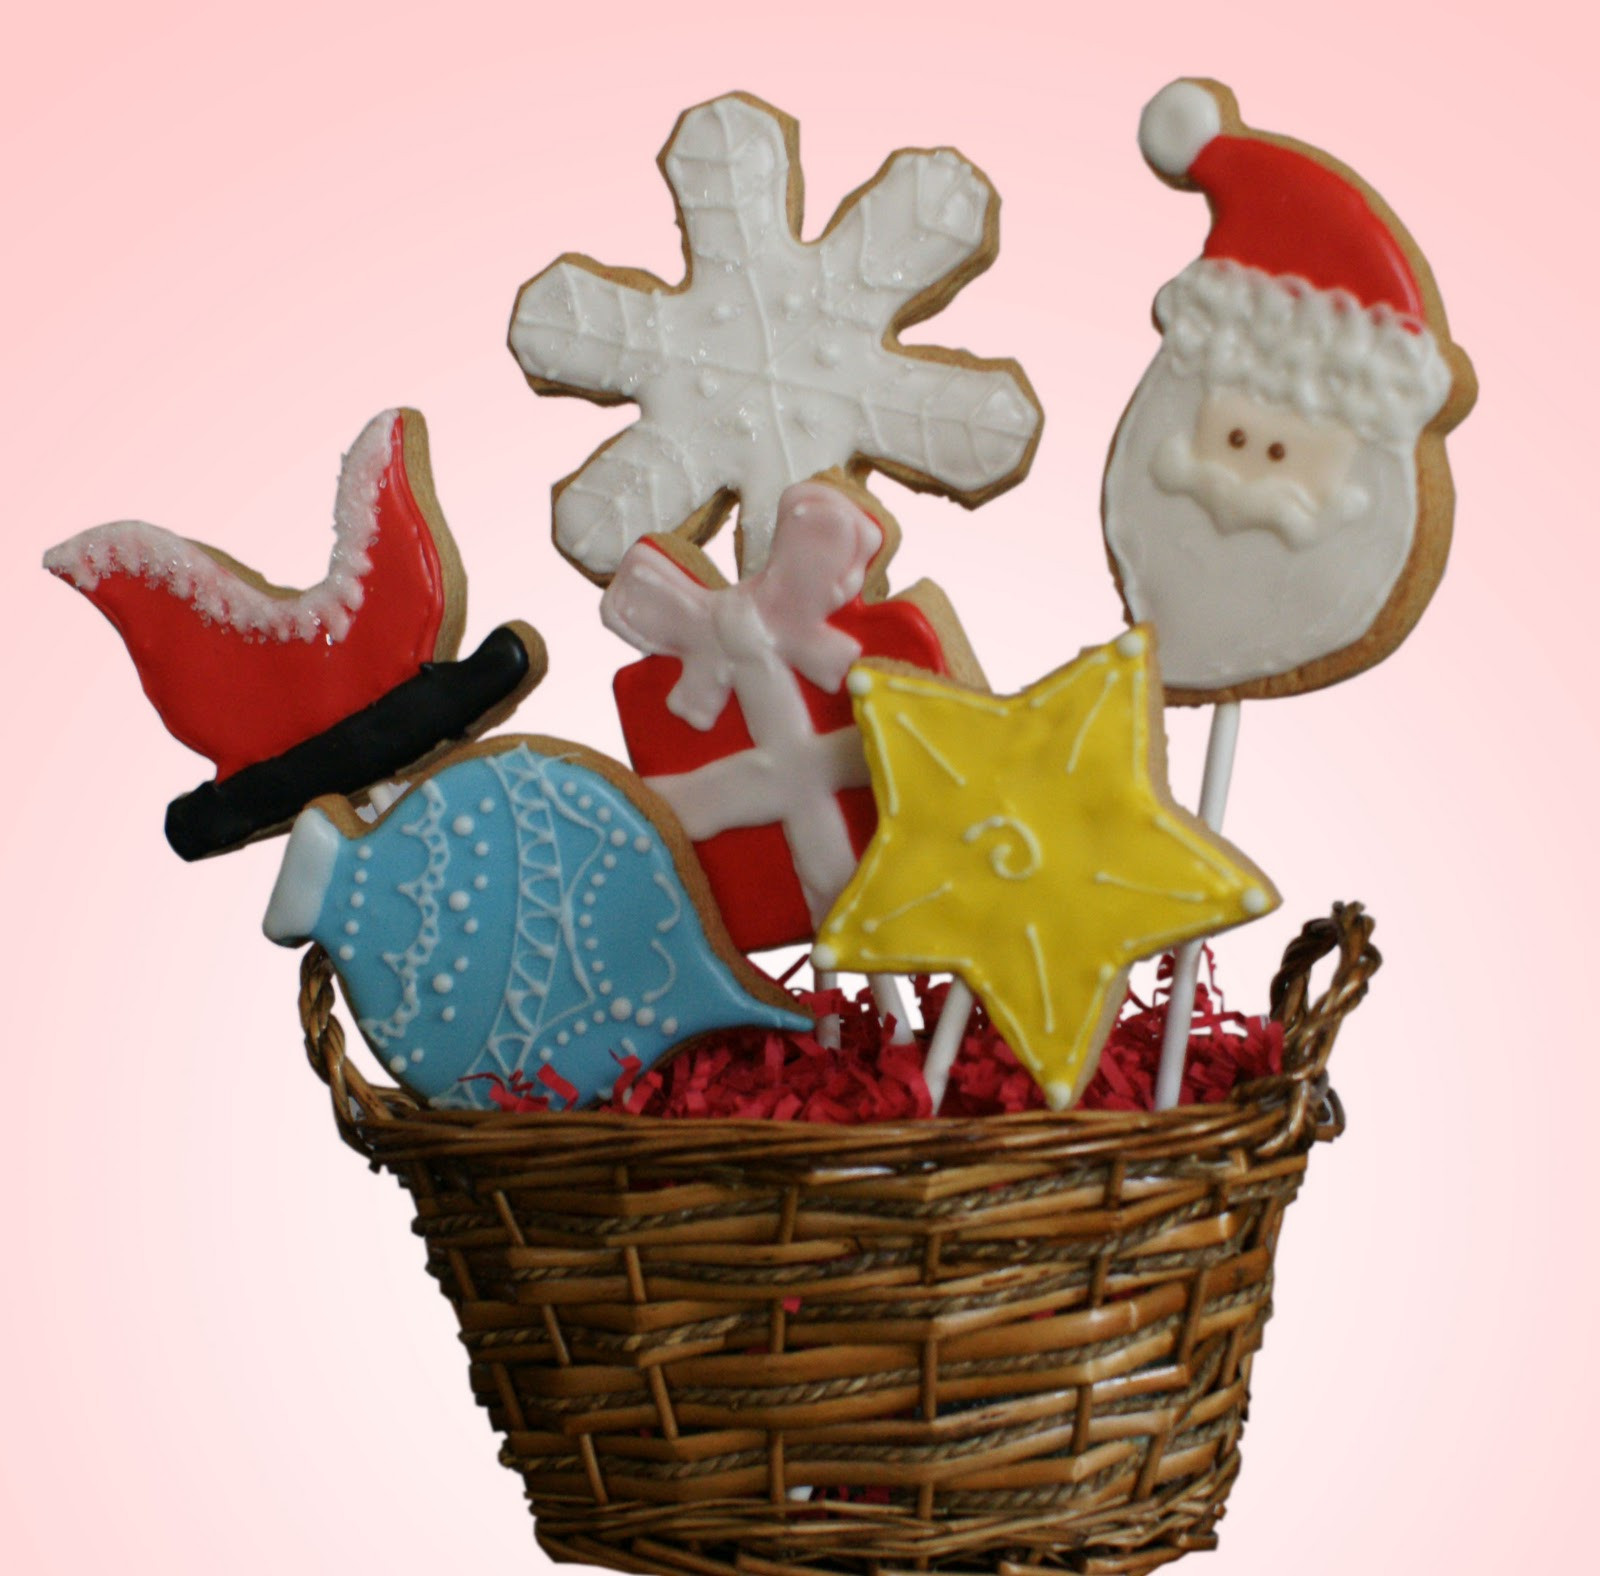 Christmas Cookies Gifts
 Little Lulu s Cupcakes Christmas Cookie Baskets